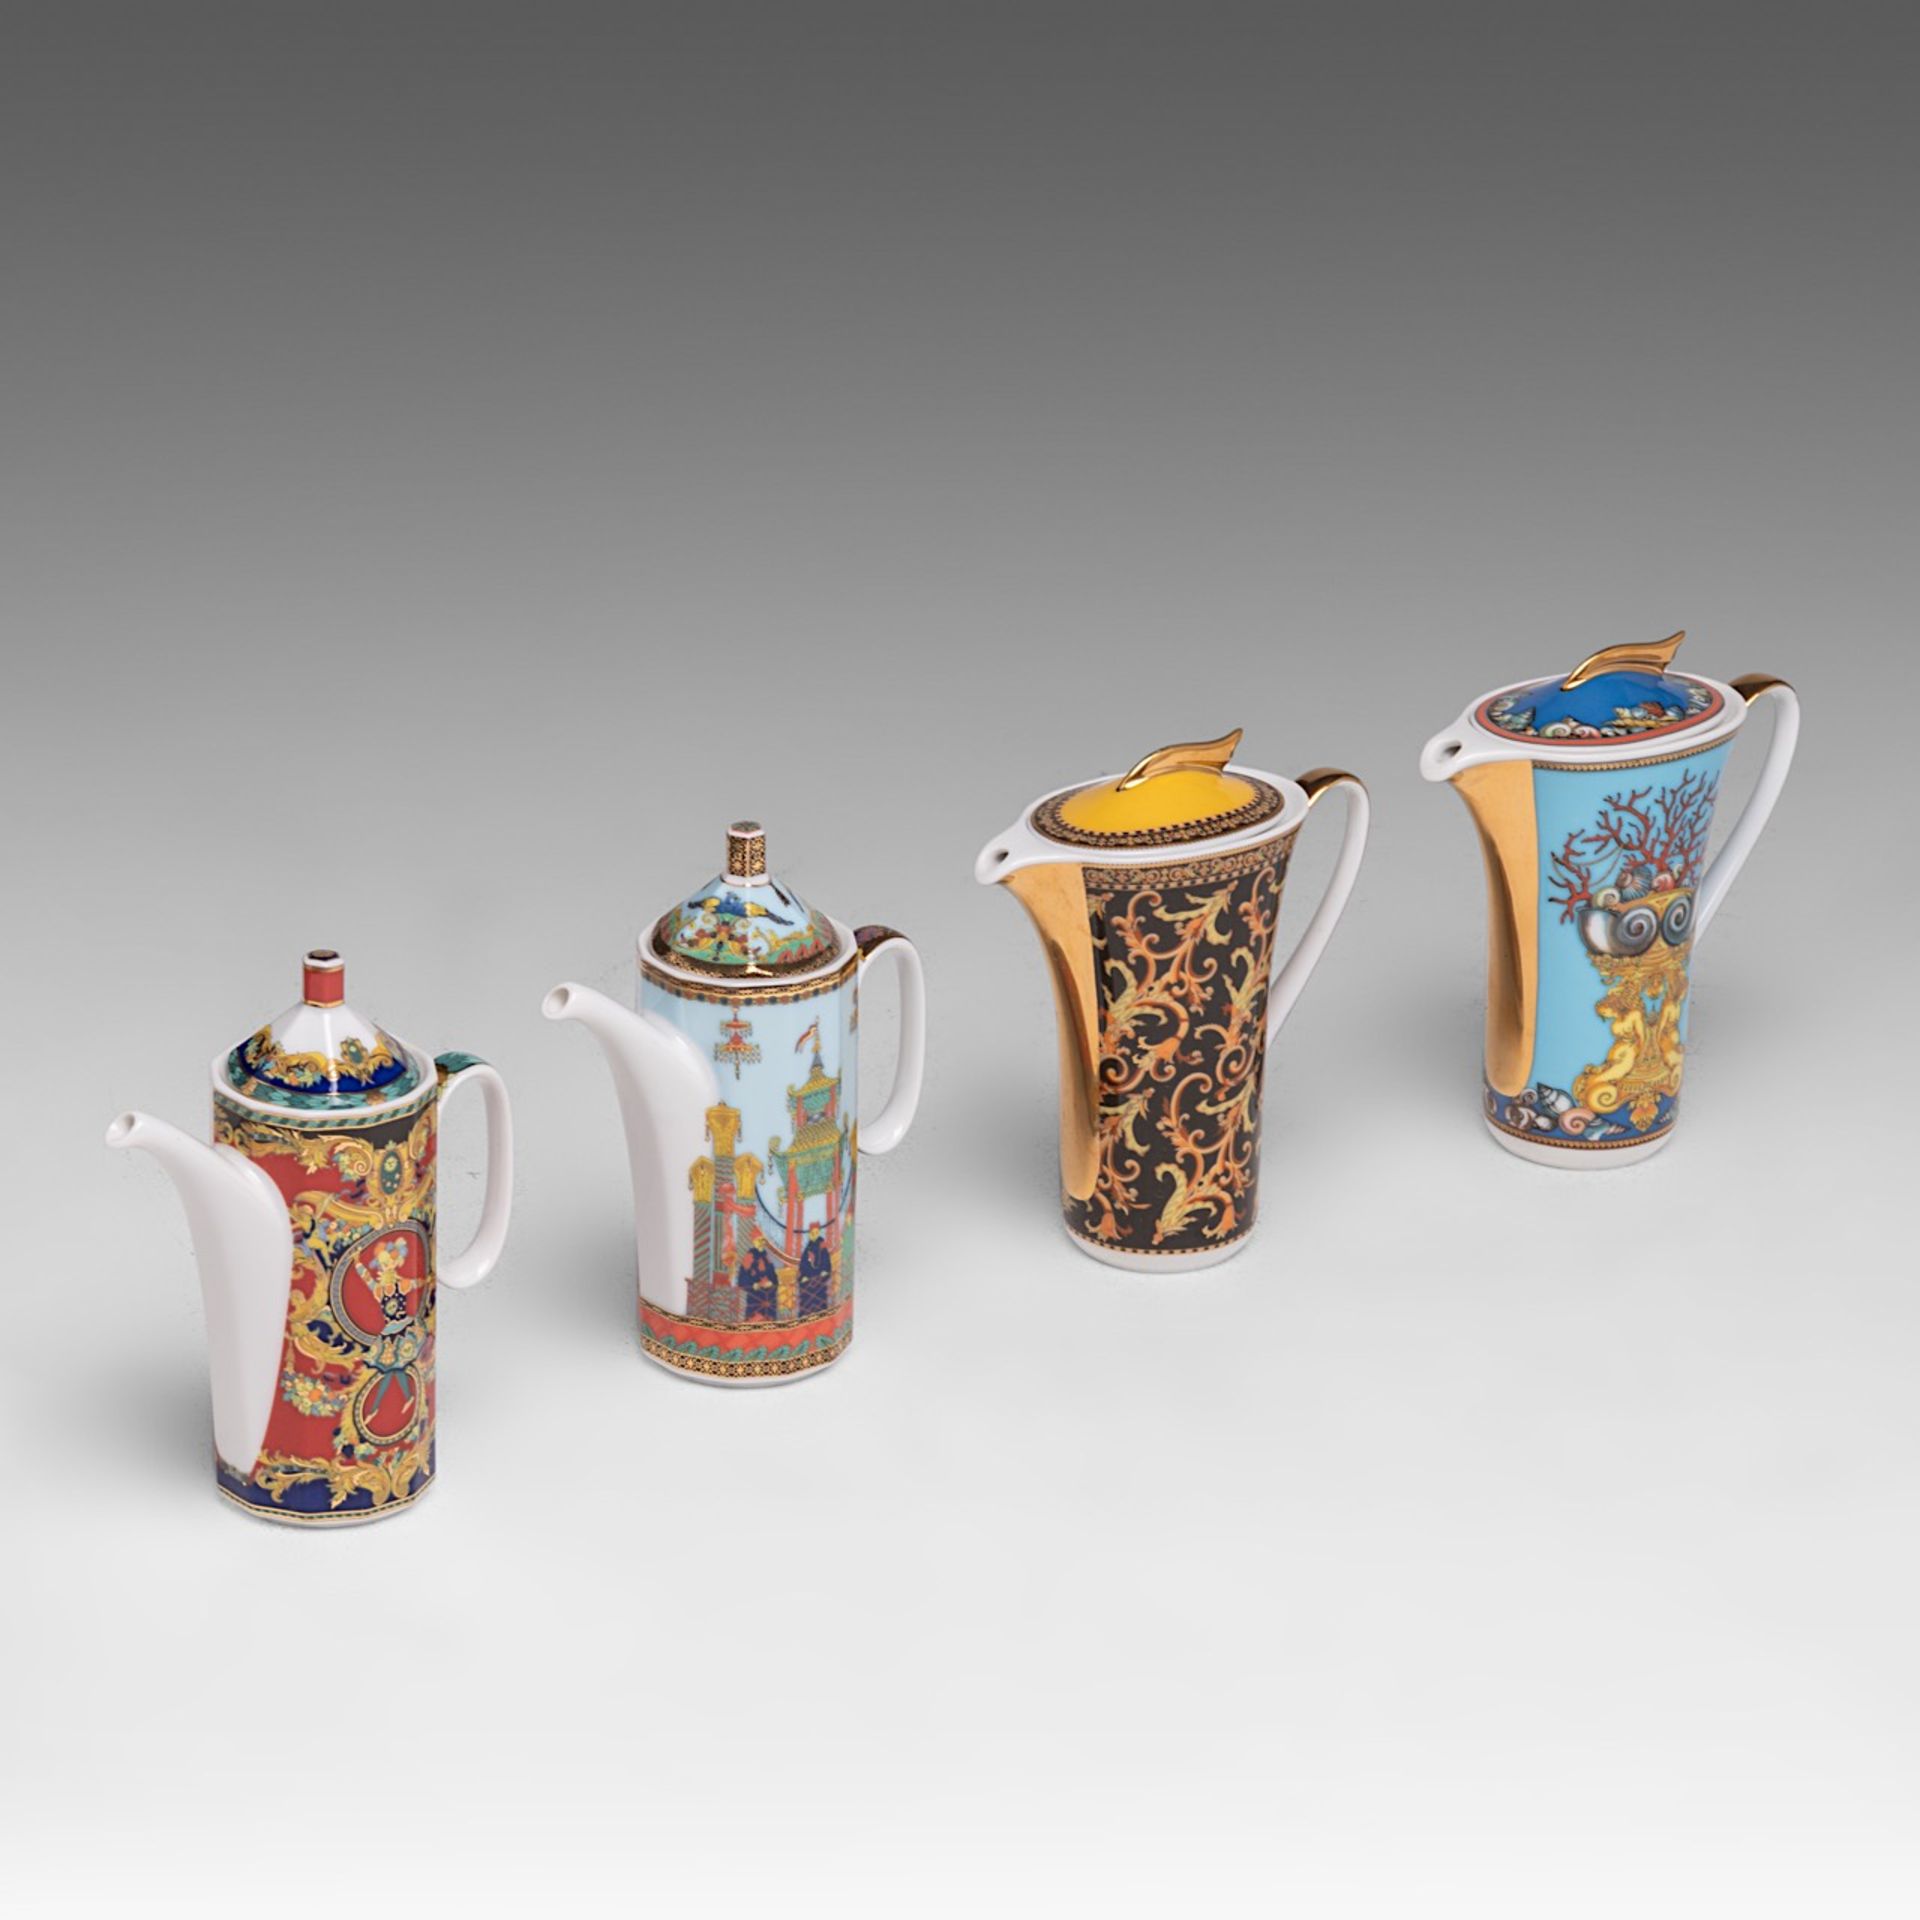 A 68-piece set of Versace 'Ikarus medaillon meandre d'or', porcelain tableware for Rosenthal, added - Image 11 of 11